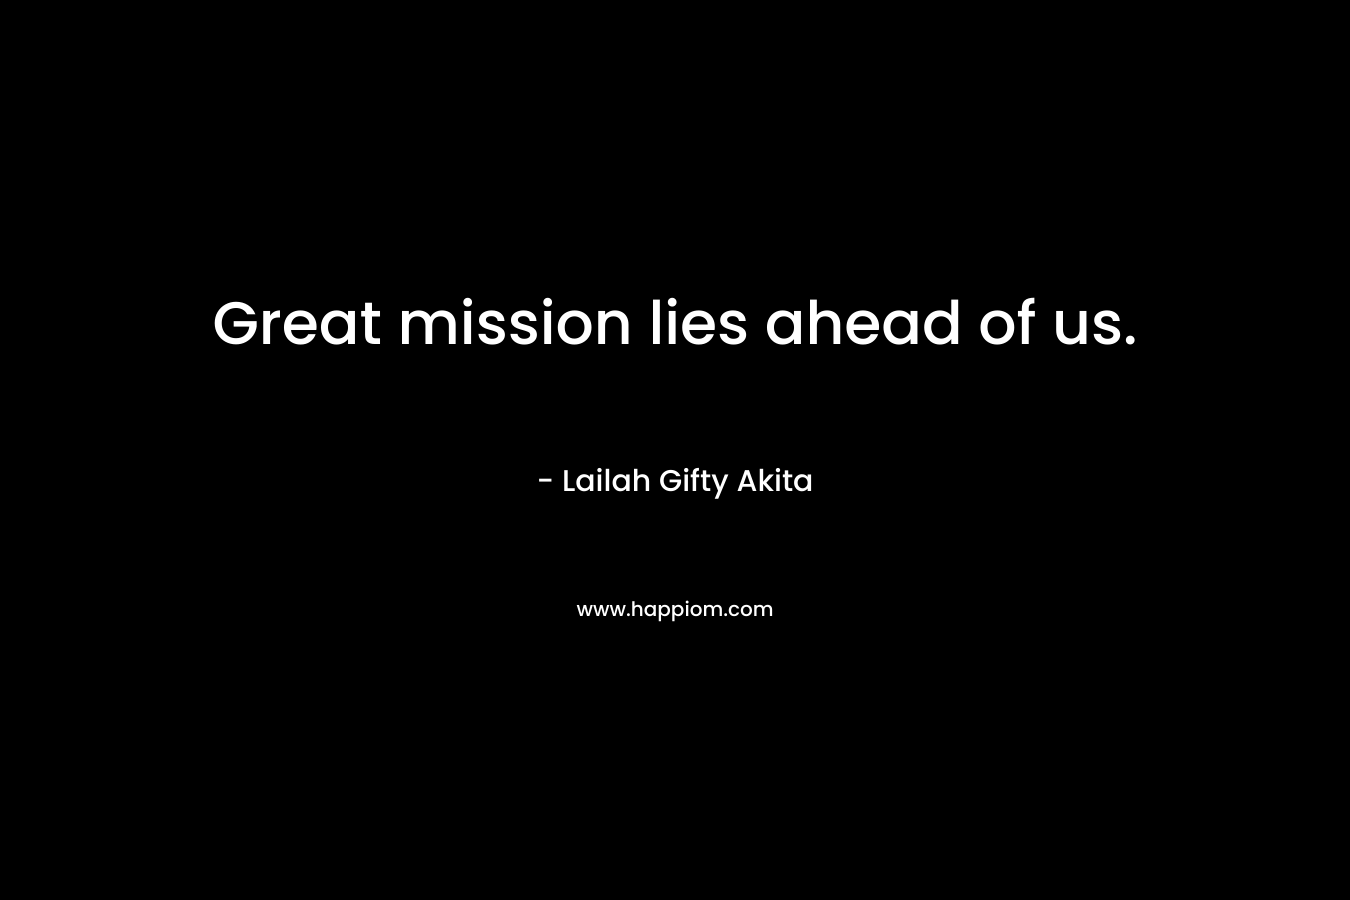 Great mission lies ahead of us.